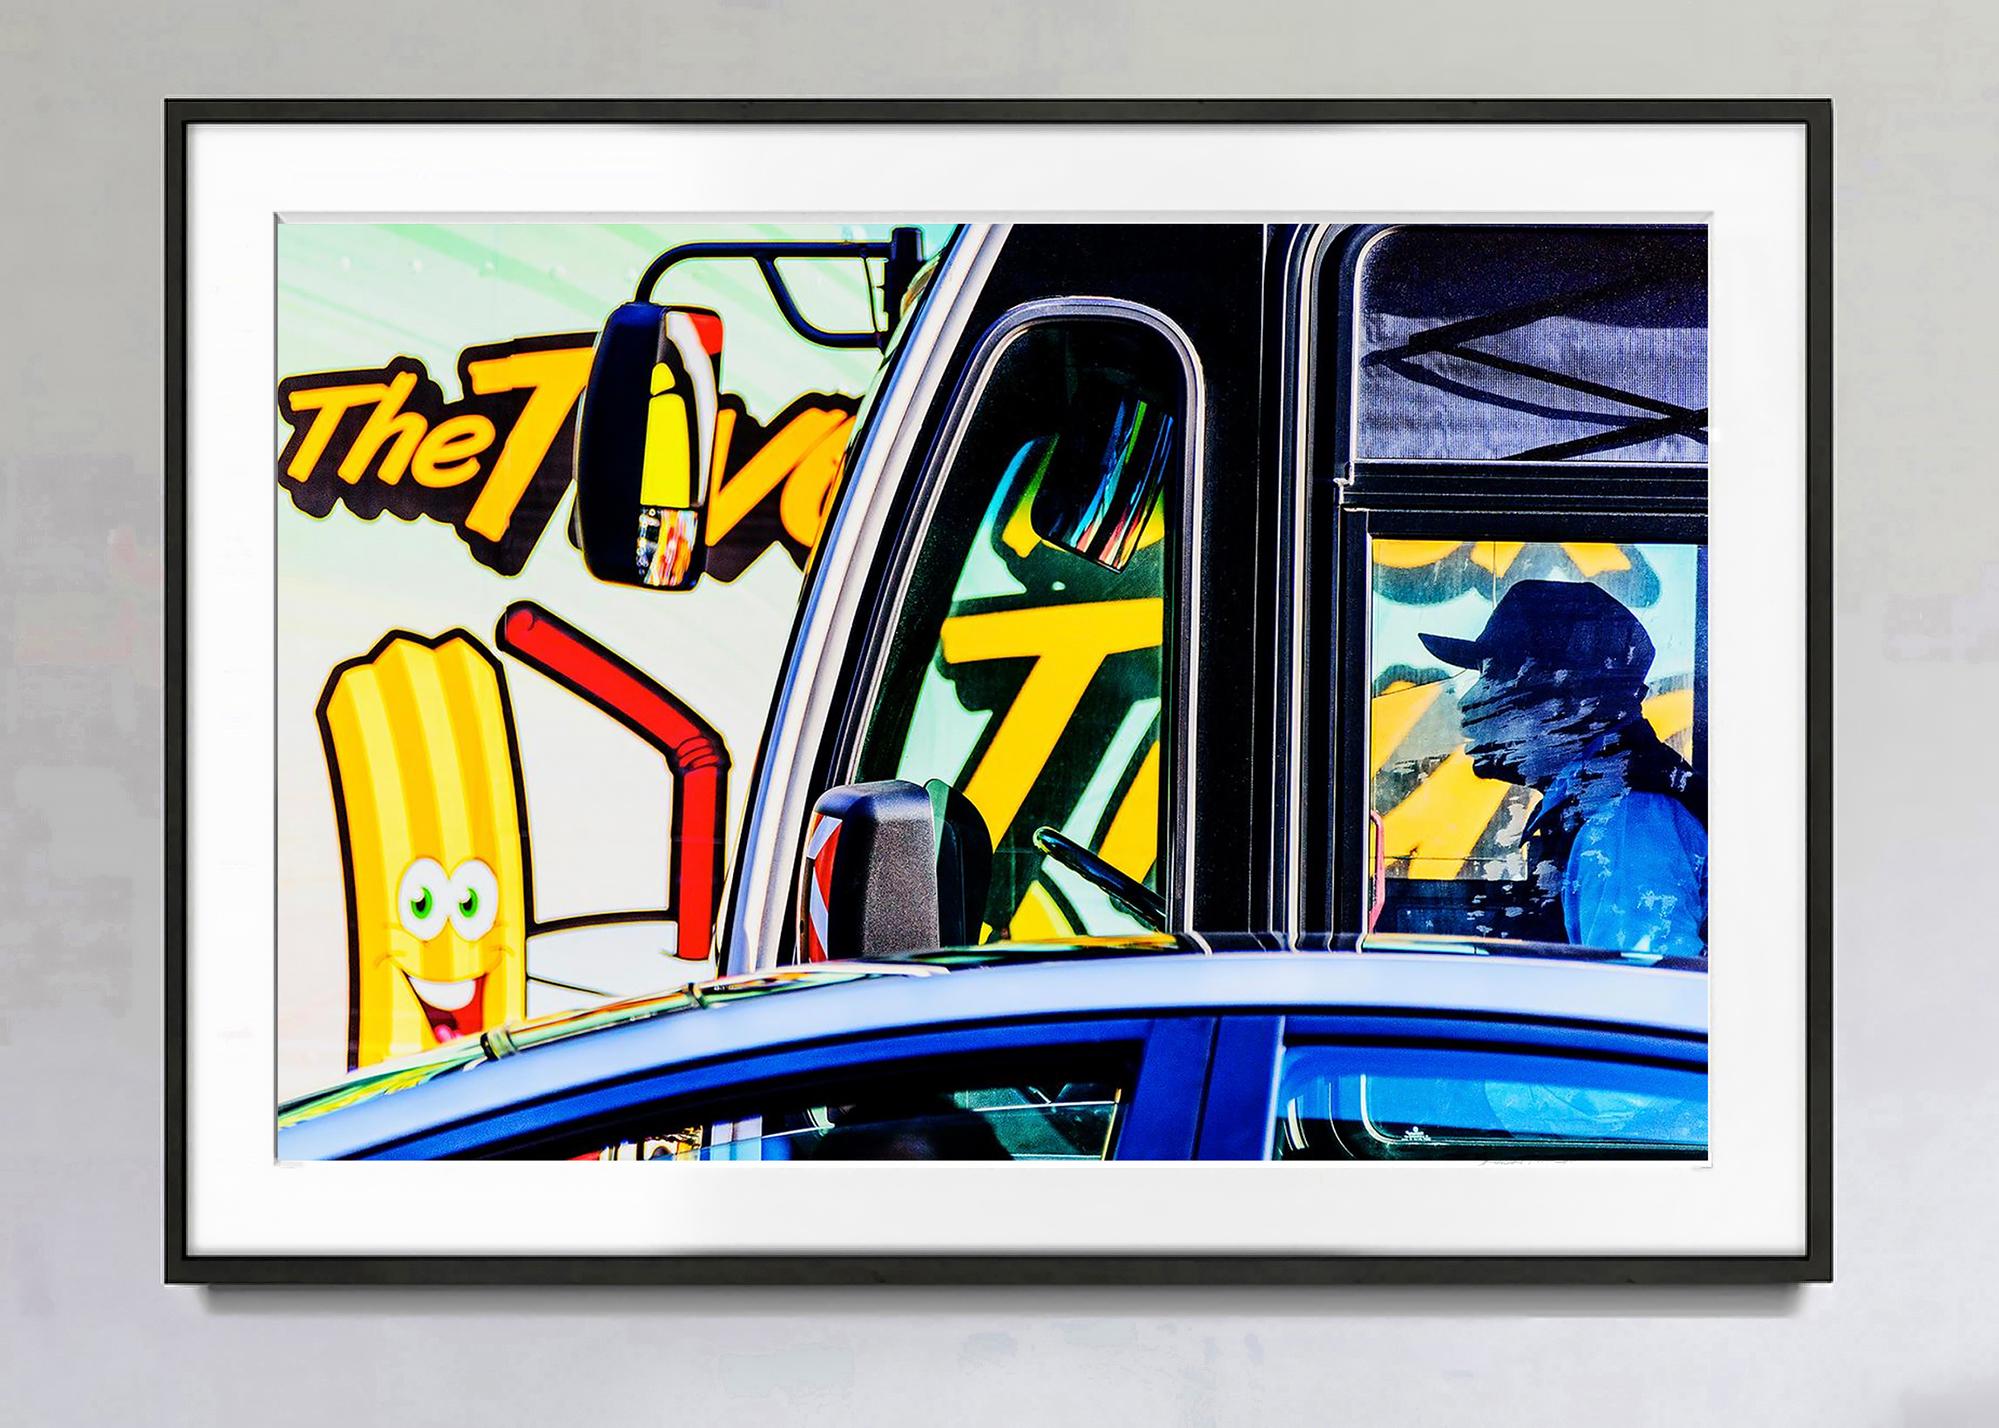 Street art comes to the intersection of street photography.
Signed dated and numbered 3/15 lower right recto, other sizes available, unframed, printed later. Printed on Hahnemühle Fine Art paper 
Mitchell Funk is a pioneer of 